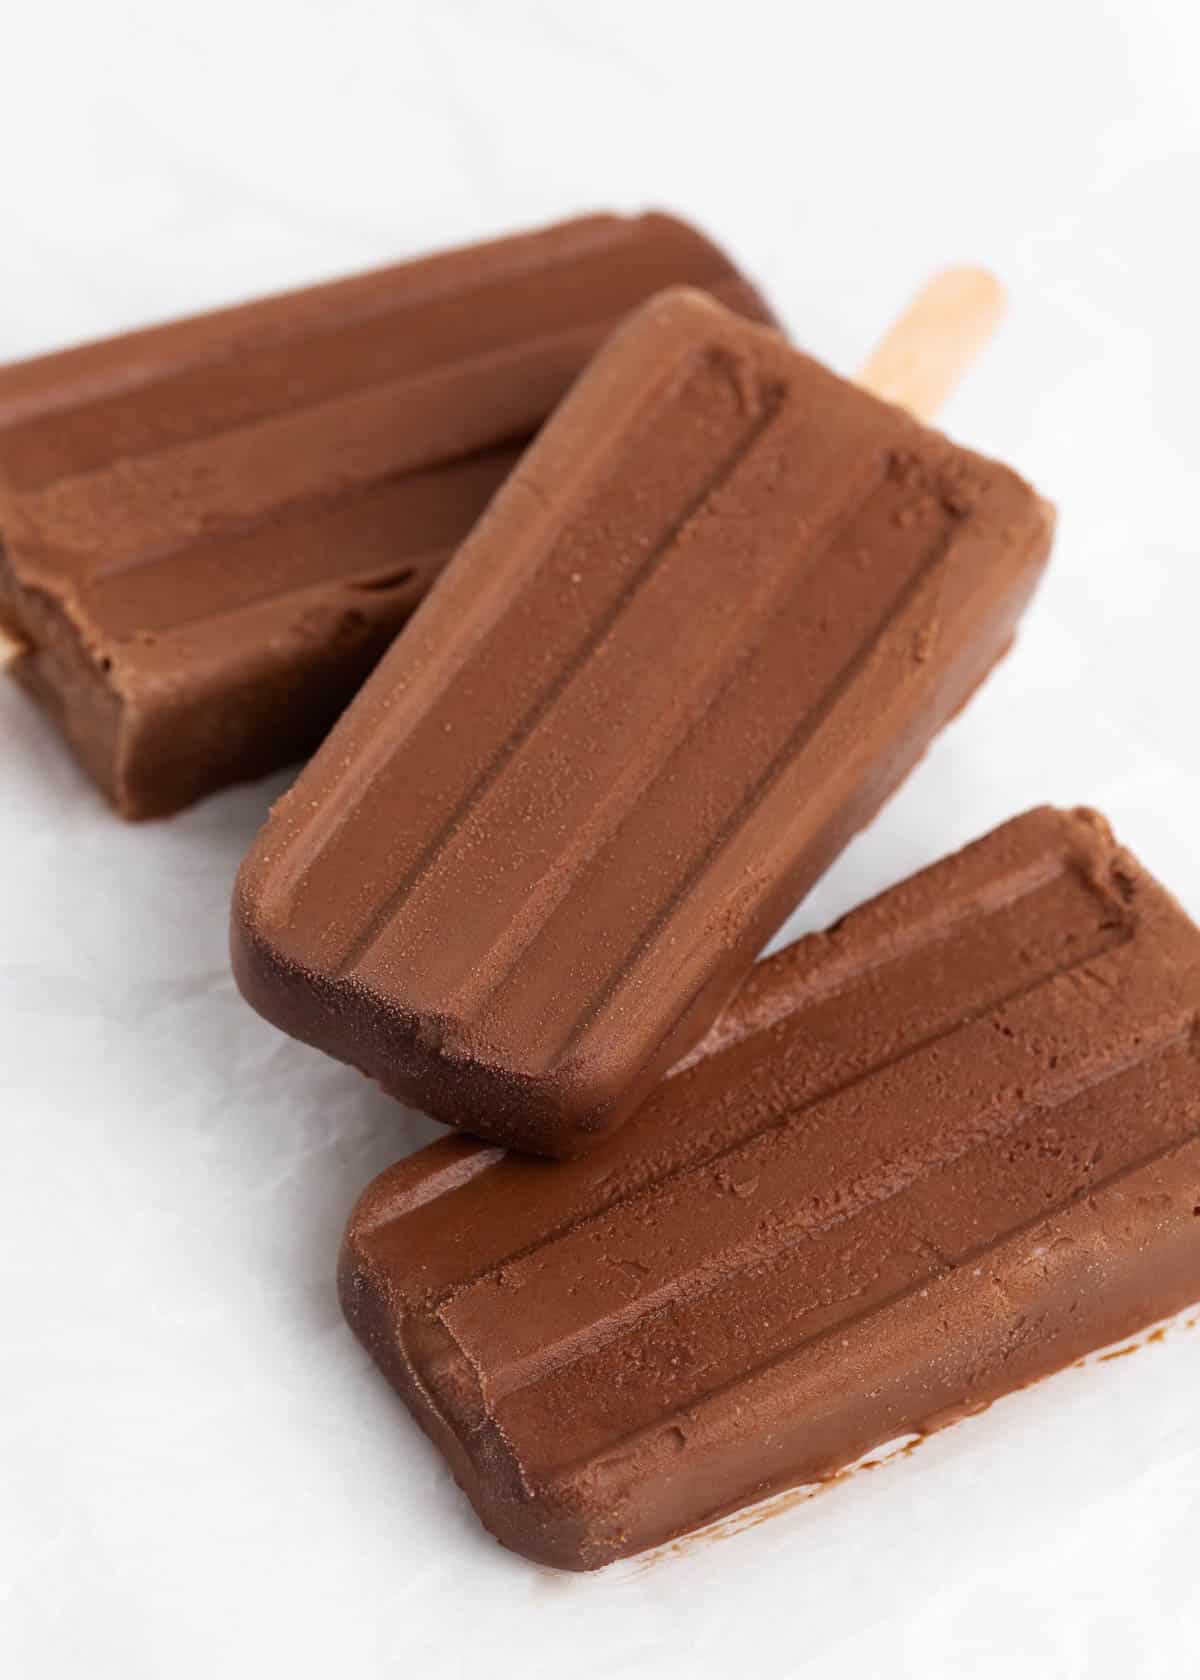 Fudge popsicles stacked on the table.